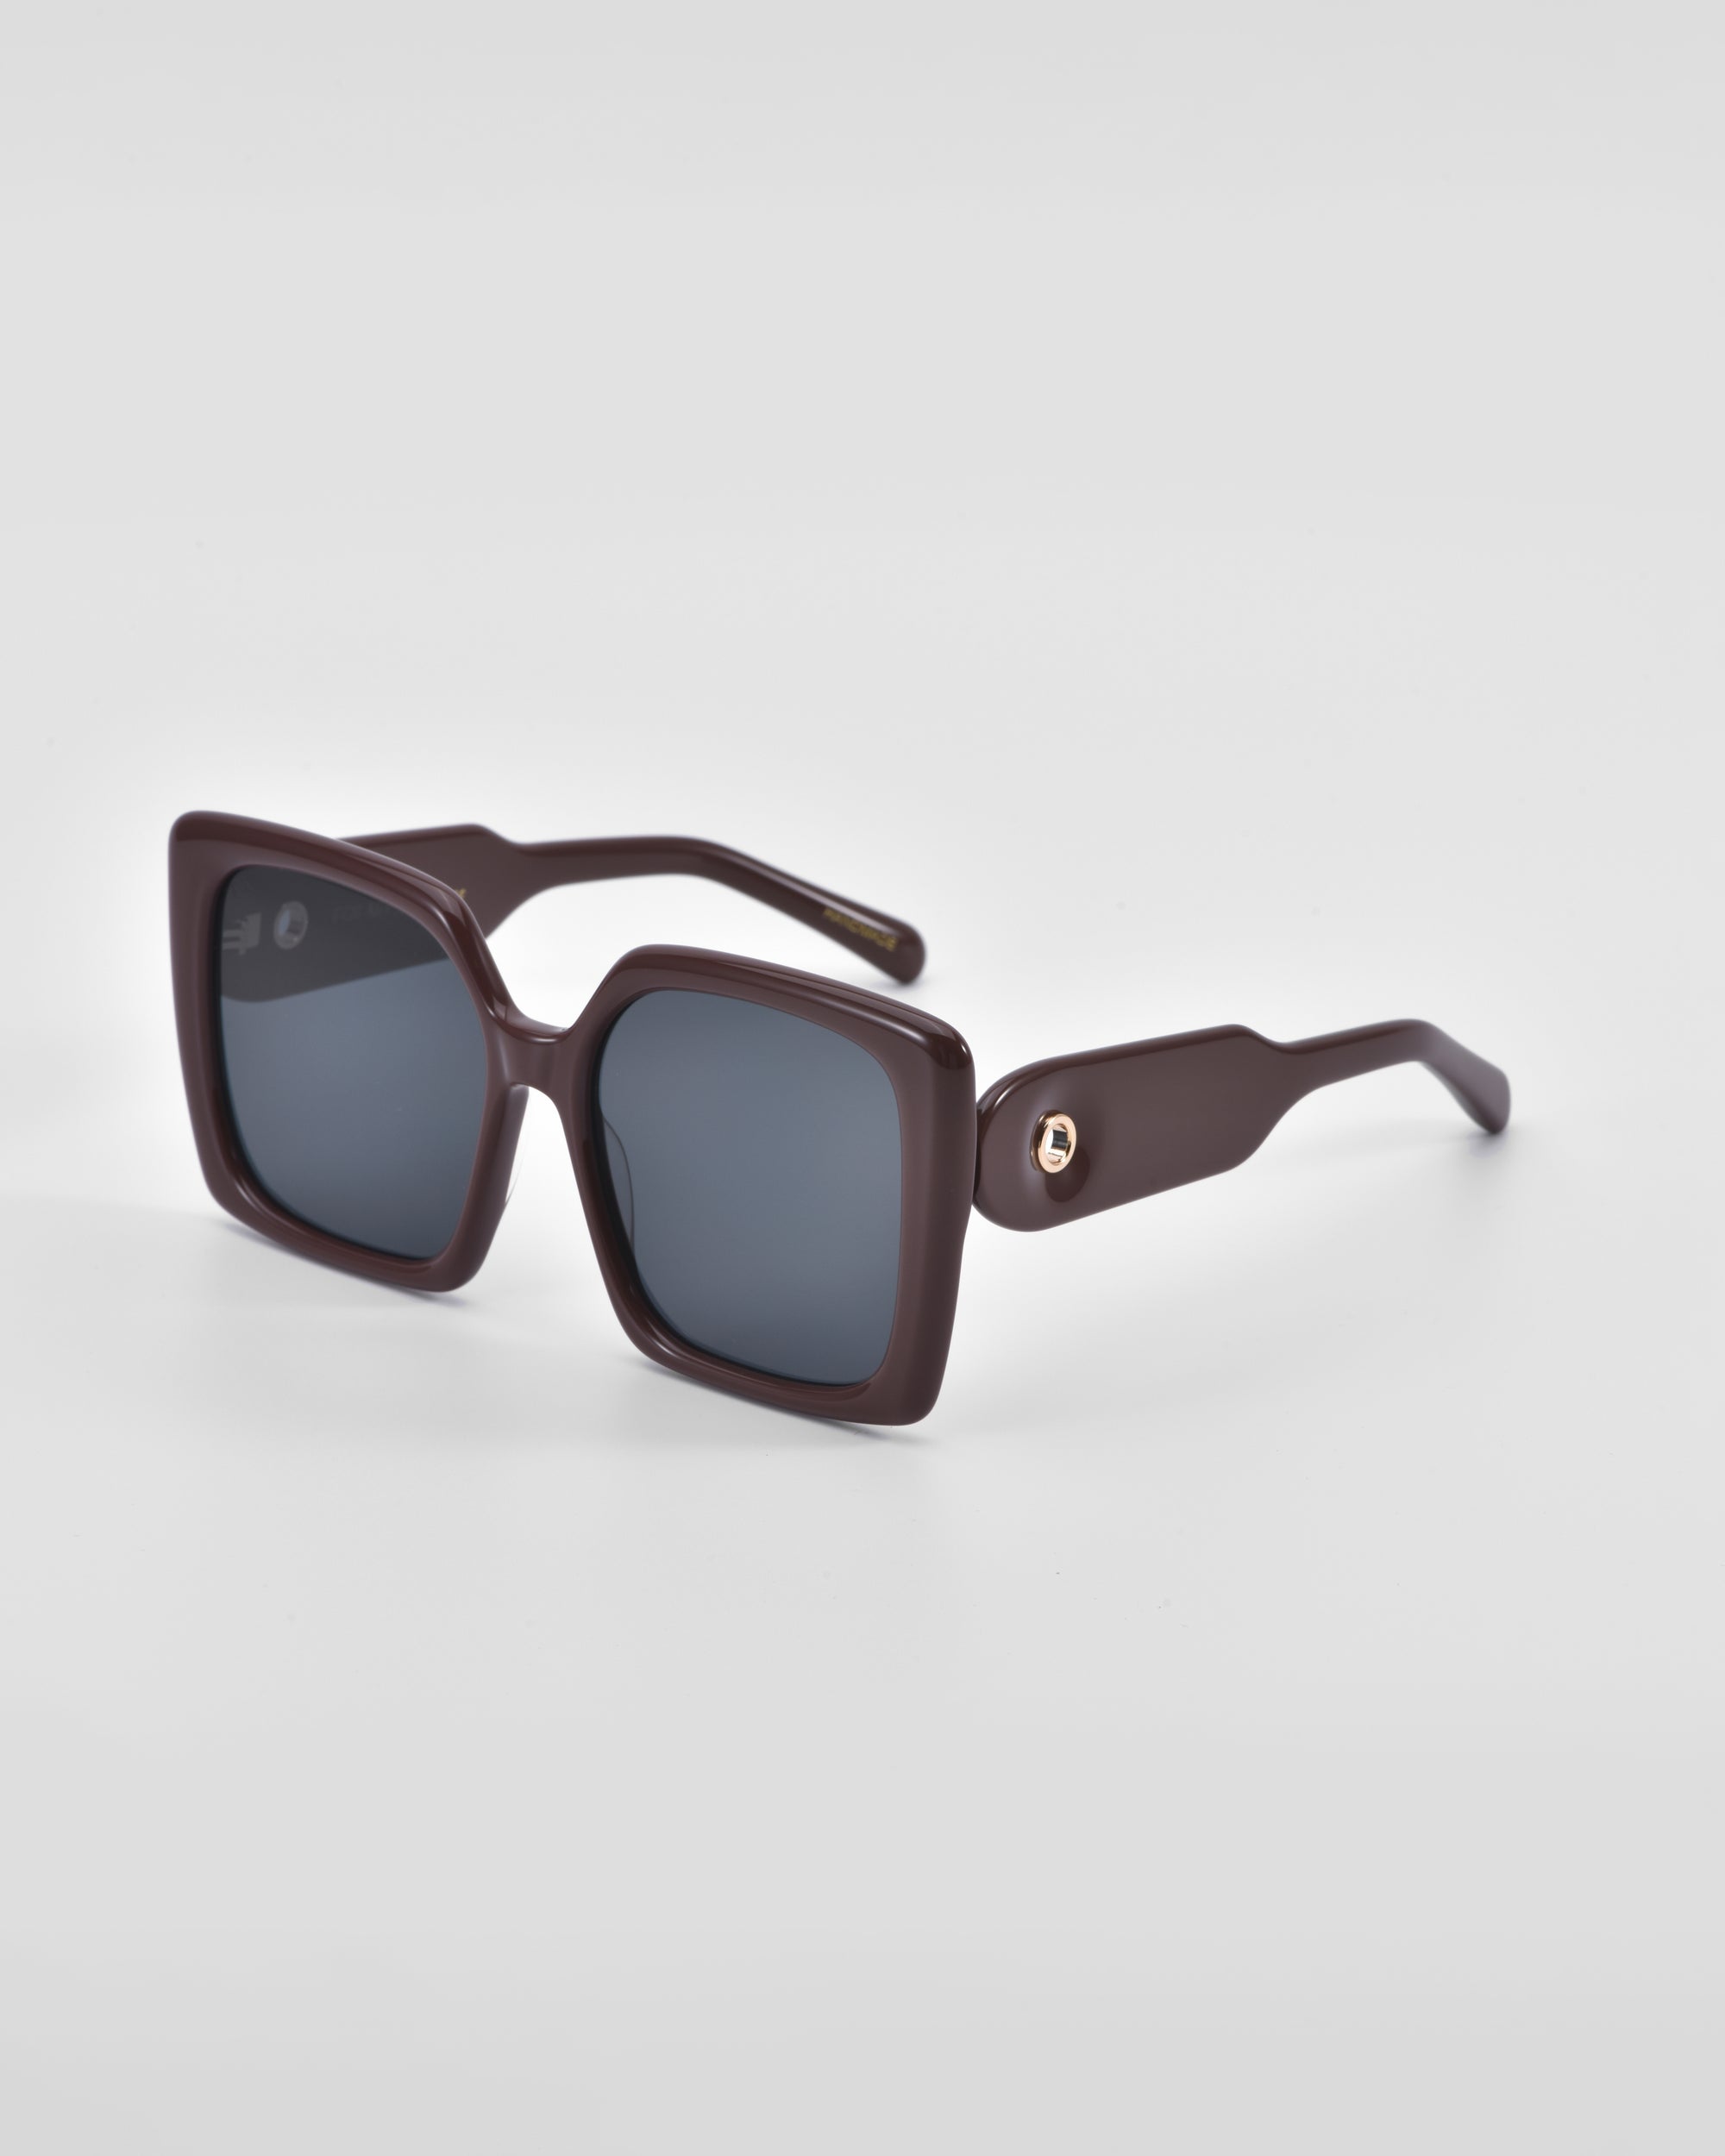 A pair of stylish, oversized, square-framed For Art's Sake® Eos sunglasses with dark lenses and thick, dark brown frames. The sunglasses are positioned against a plain white background, showcasing their design details clearly.